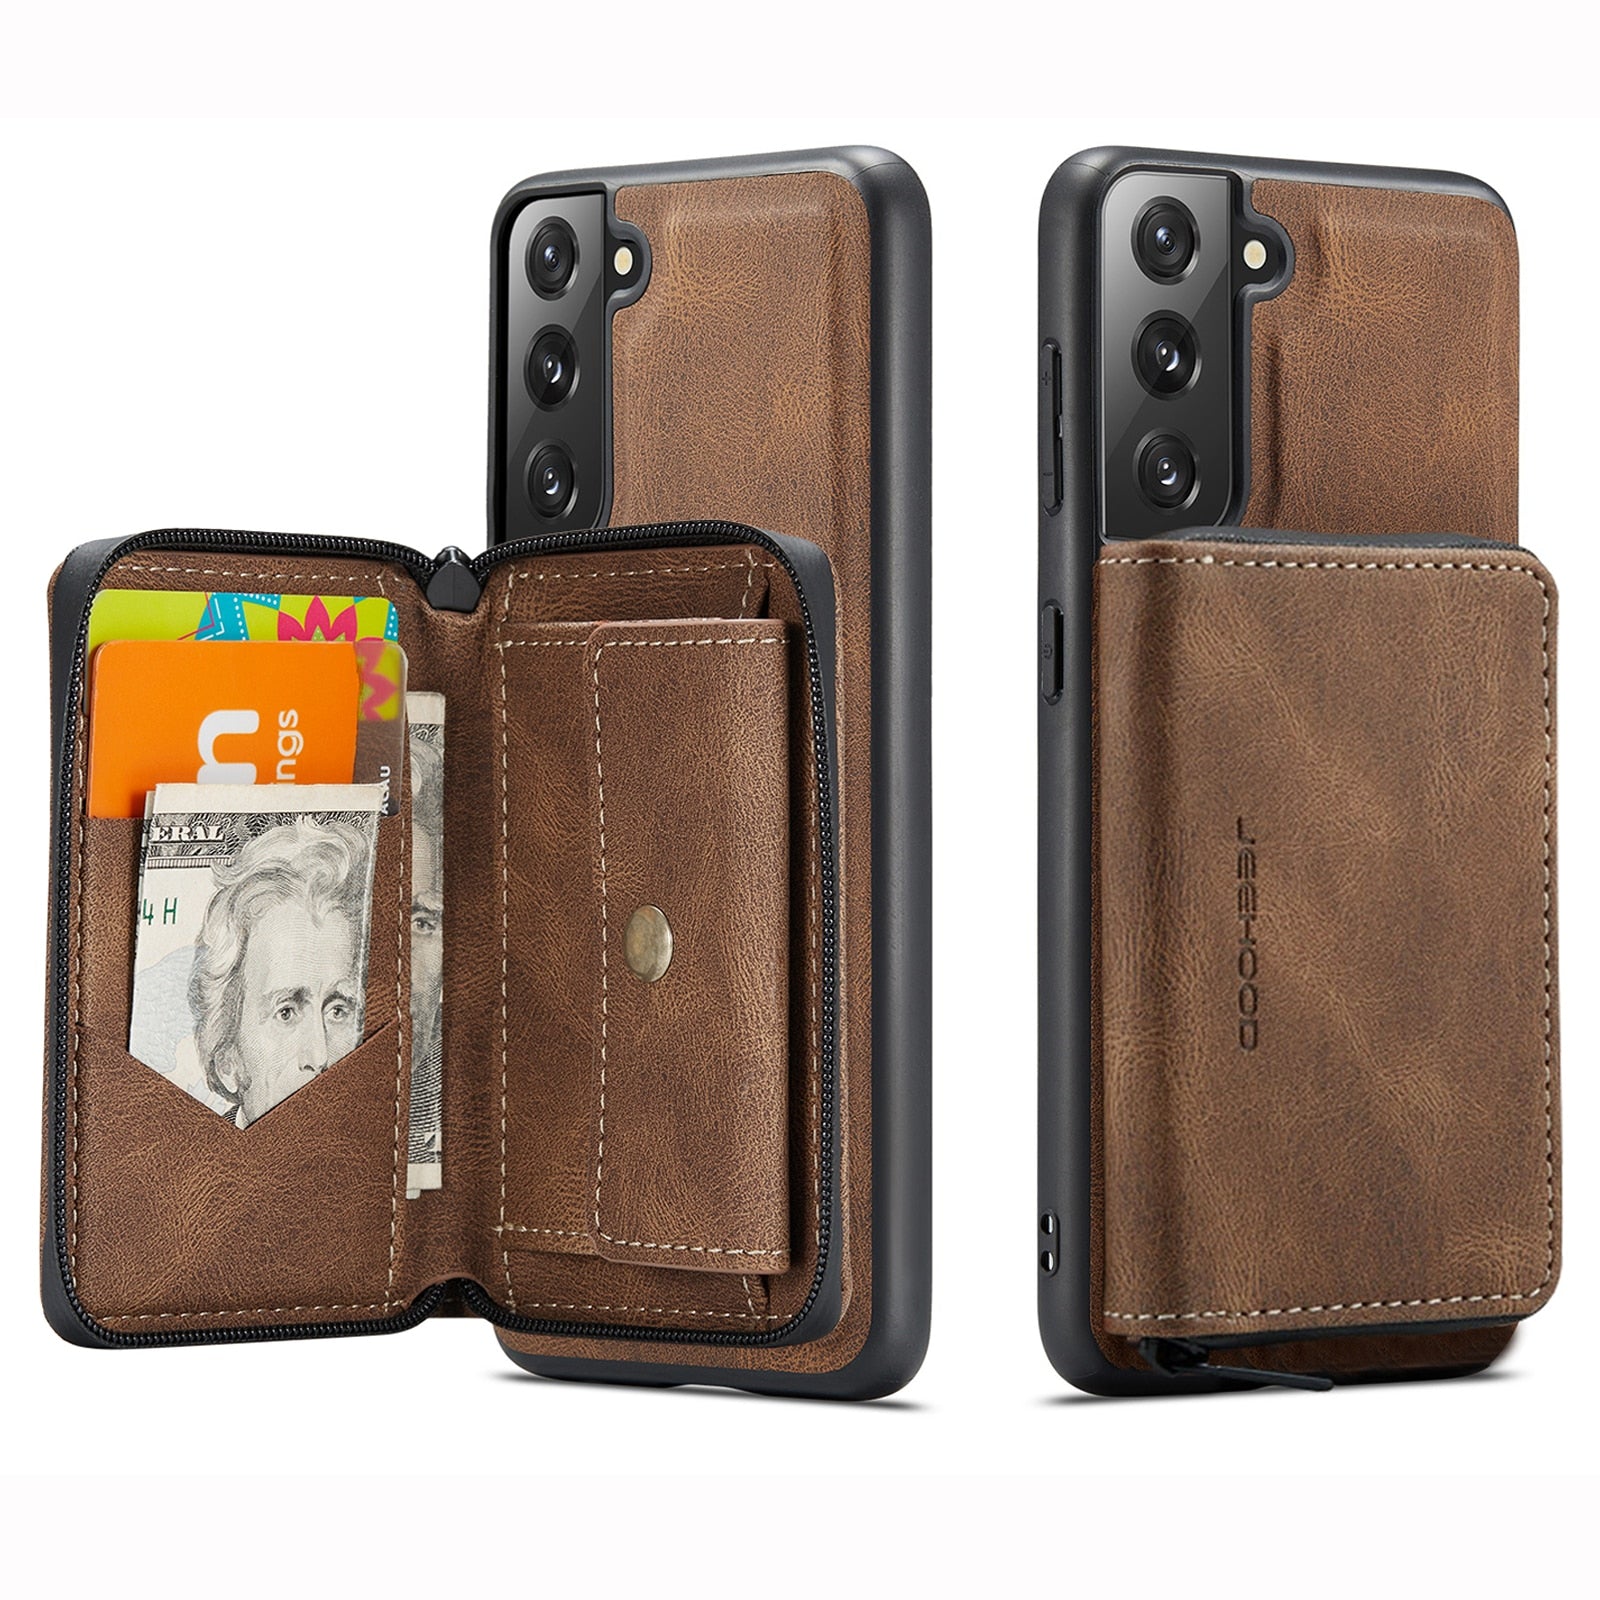 PU Leather Wallet Case For Samsung Galaxy S22 Ultra S22+ S22 5G S21 FE Case Card Solt Bag Magnetic Support Wireless Charging - 0 For Galaxy S21 FE / Brown / United States Find Epic Store